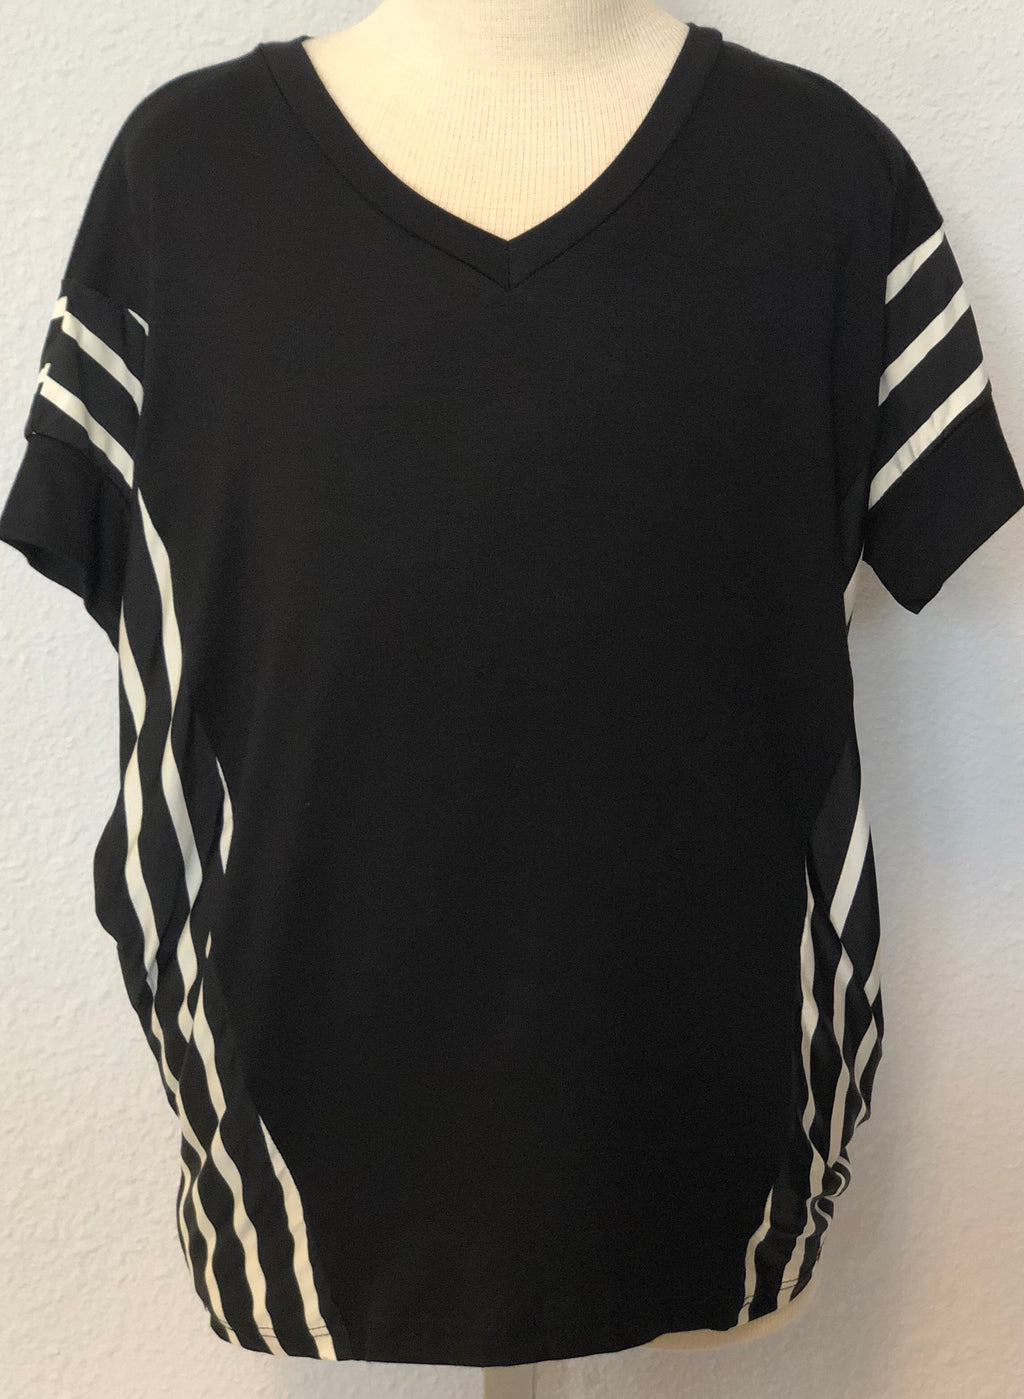 K SOLID STRIPED TUNIC TOP